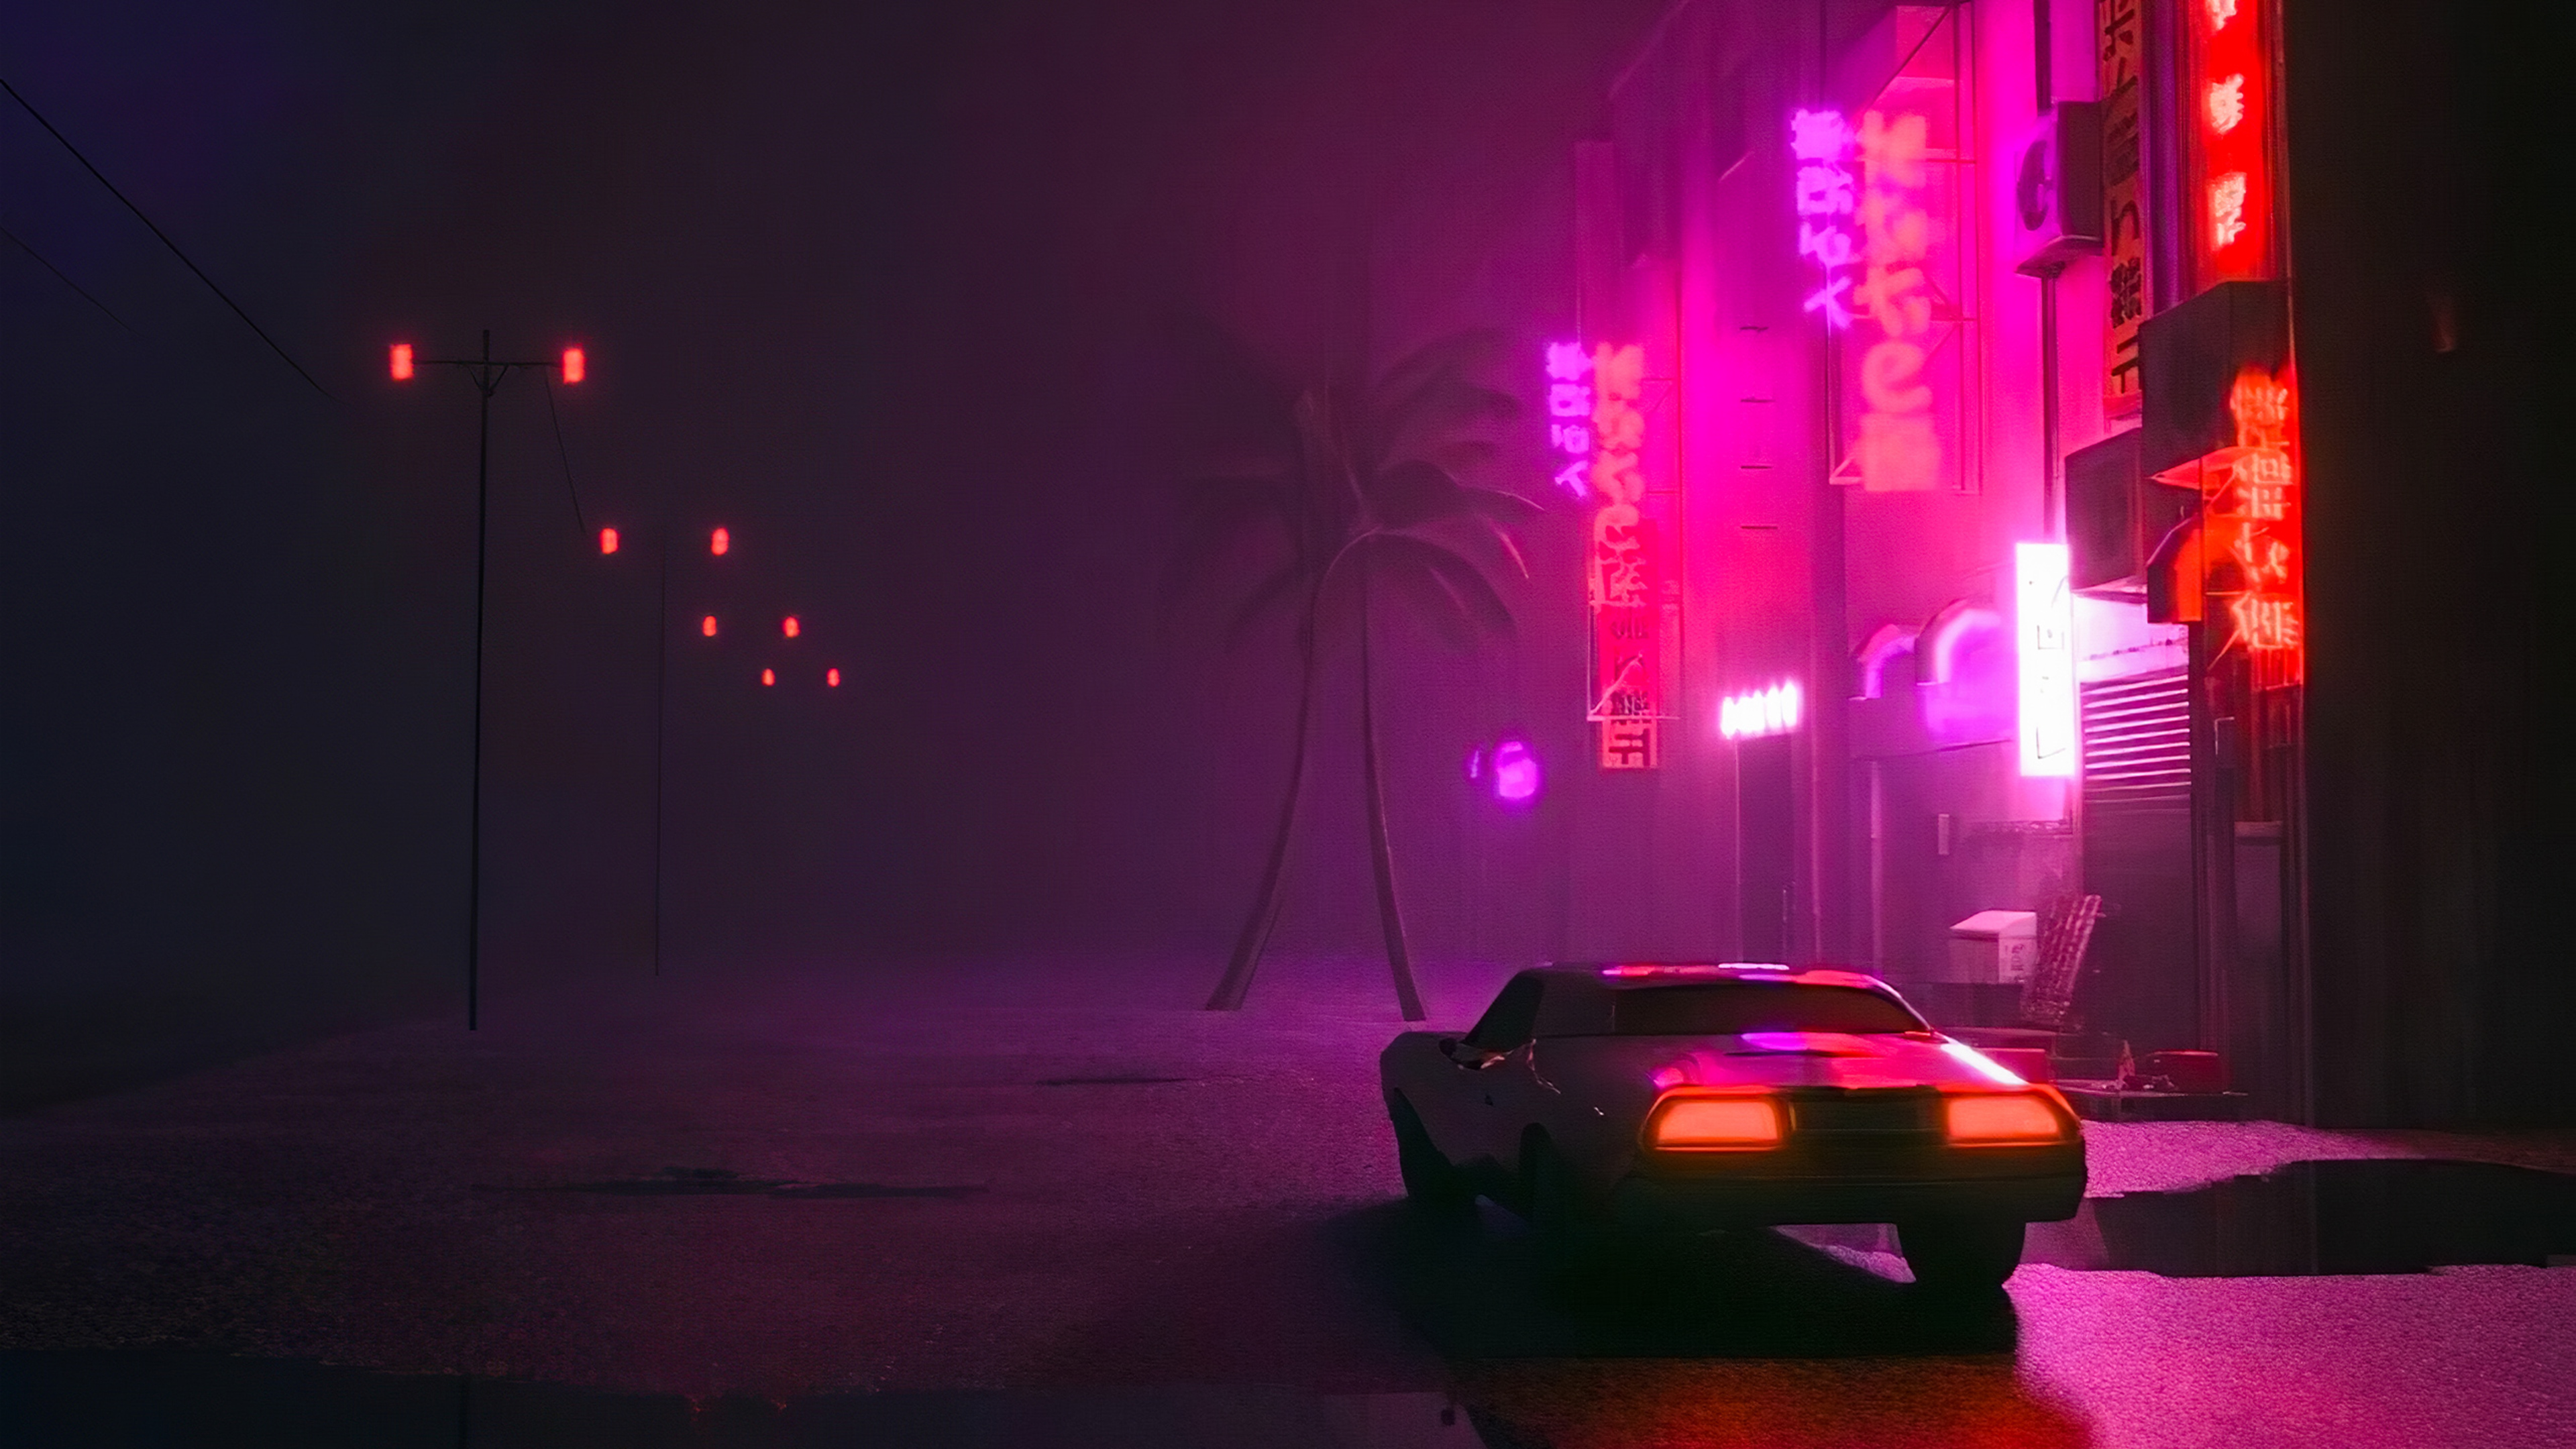 3840x2160 Synthwave Car On Street 4k Hd 4k Wallpapers Images Backgrounds Photos And Pictures